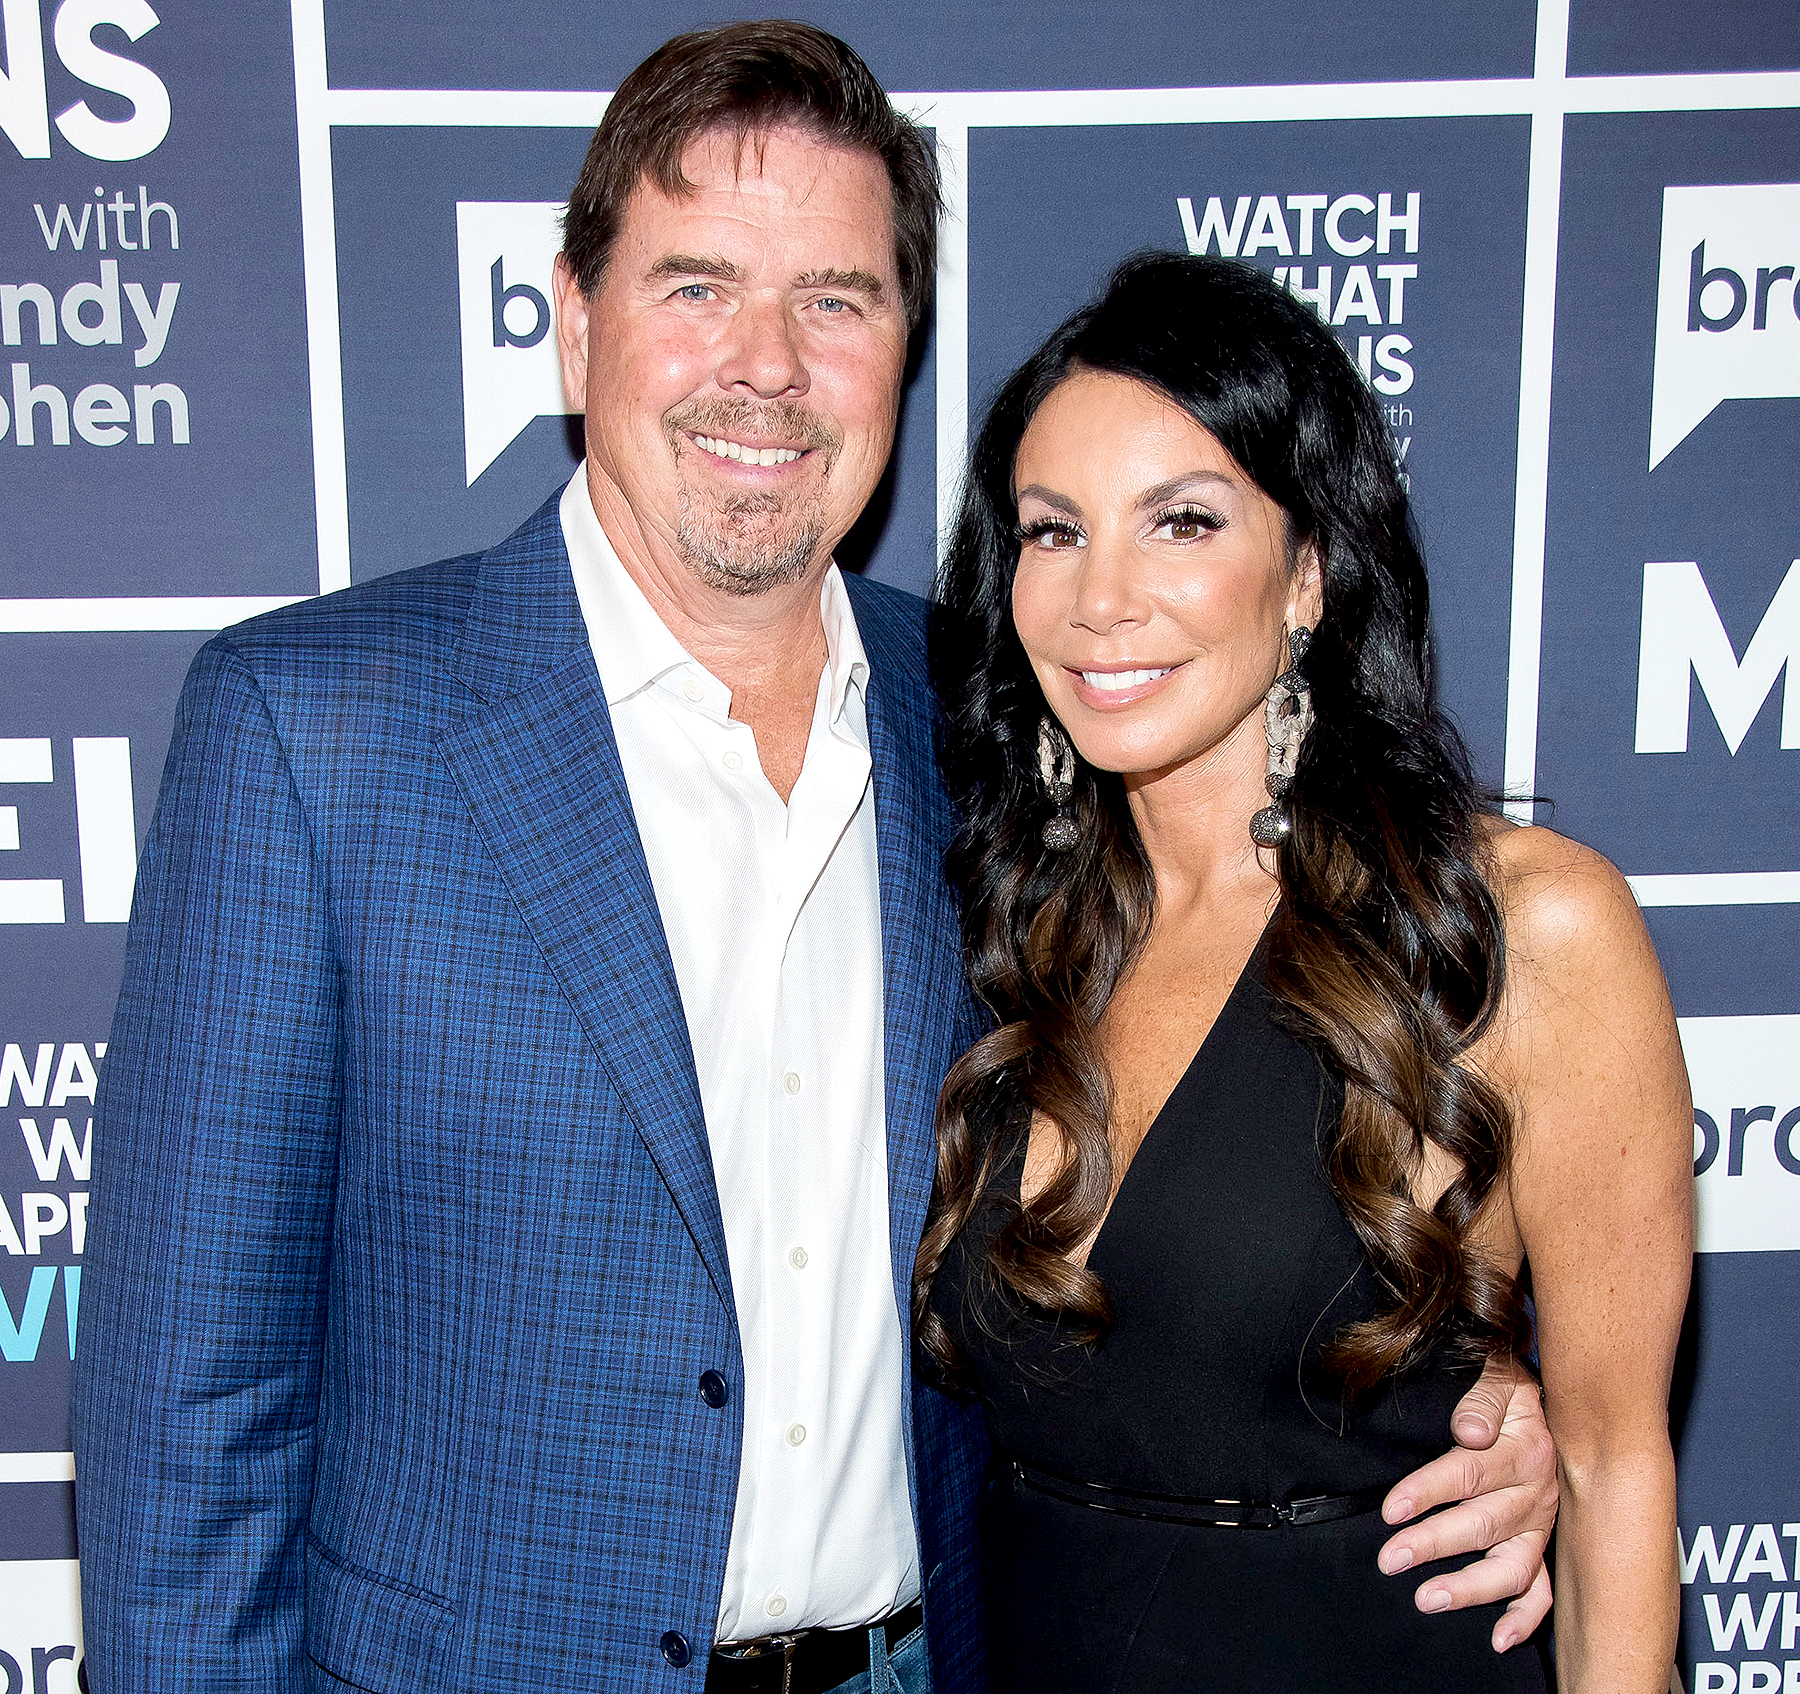 RHONJ Recap Danielle Staub Gets Engaged to Marty Caffrey picture